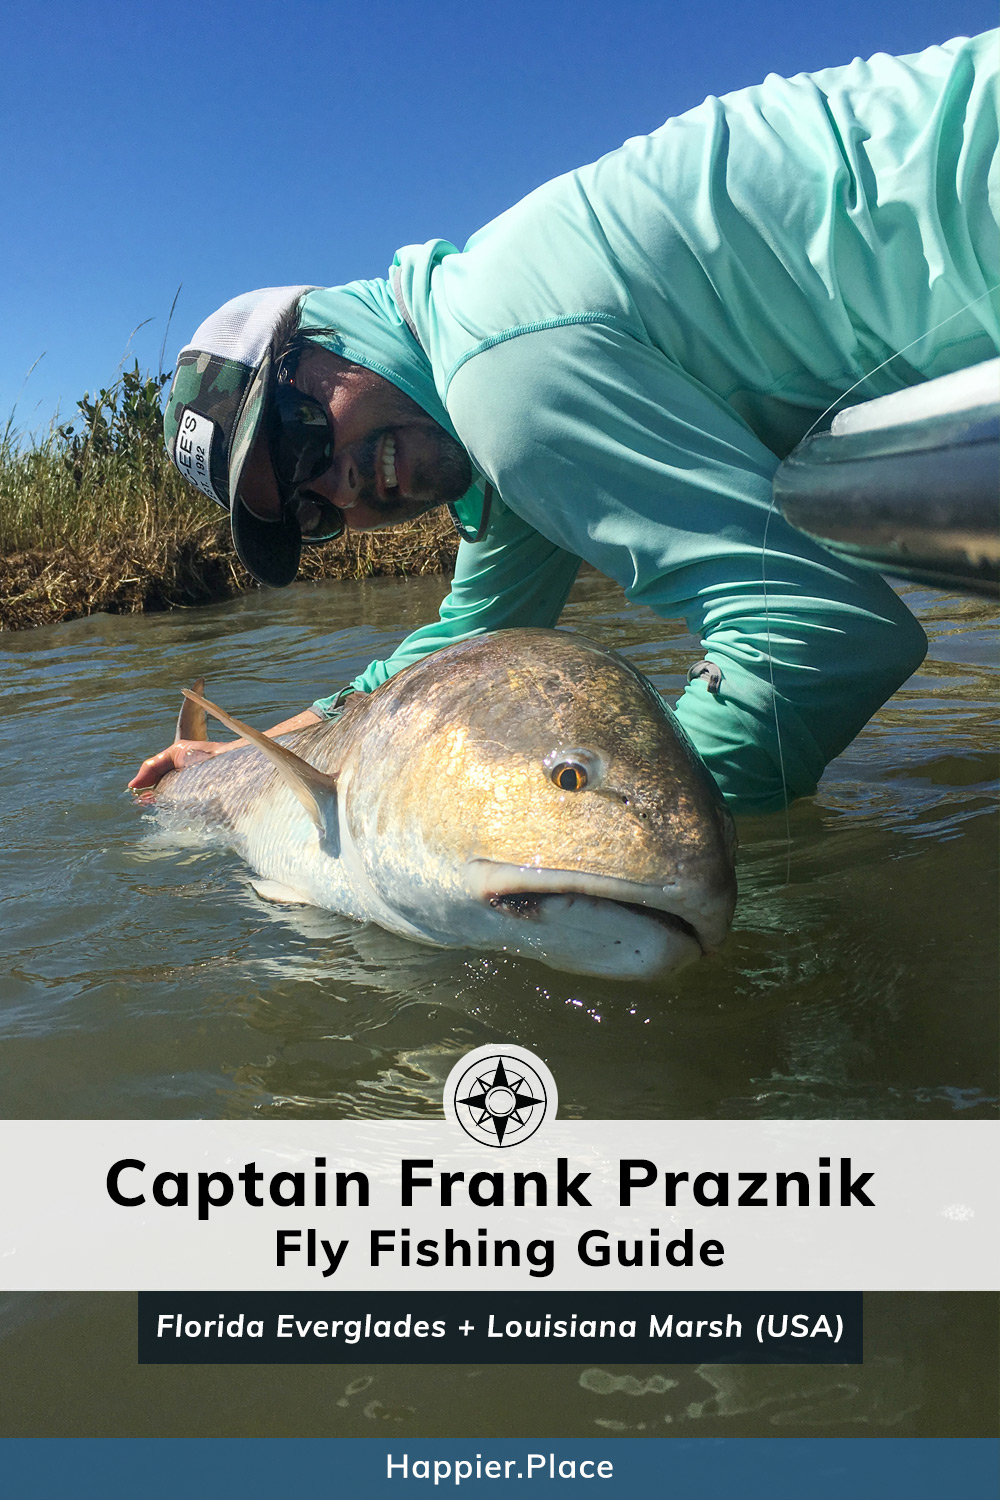 Captain Frank Praznik, Fly Fishing Guide in Louisiana Marsh and Florida Everglades. Seen here with a Red Fish.